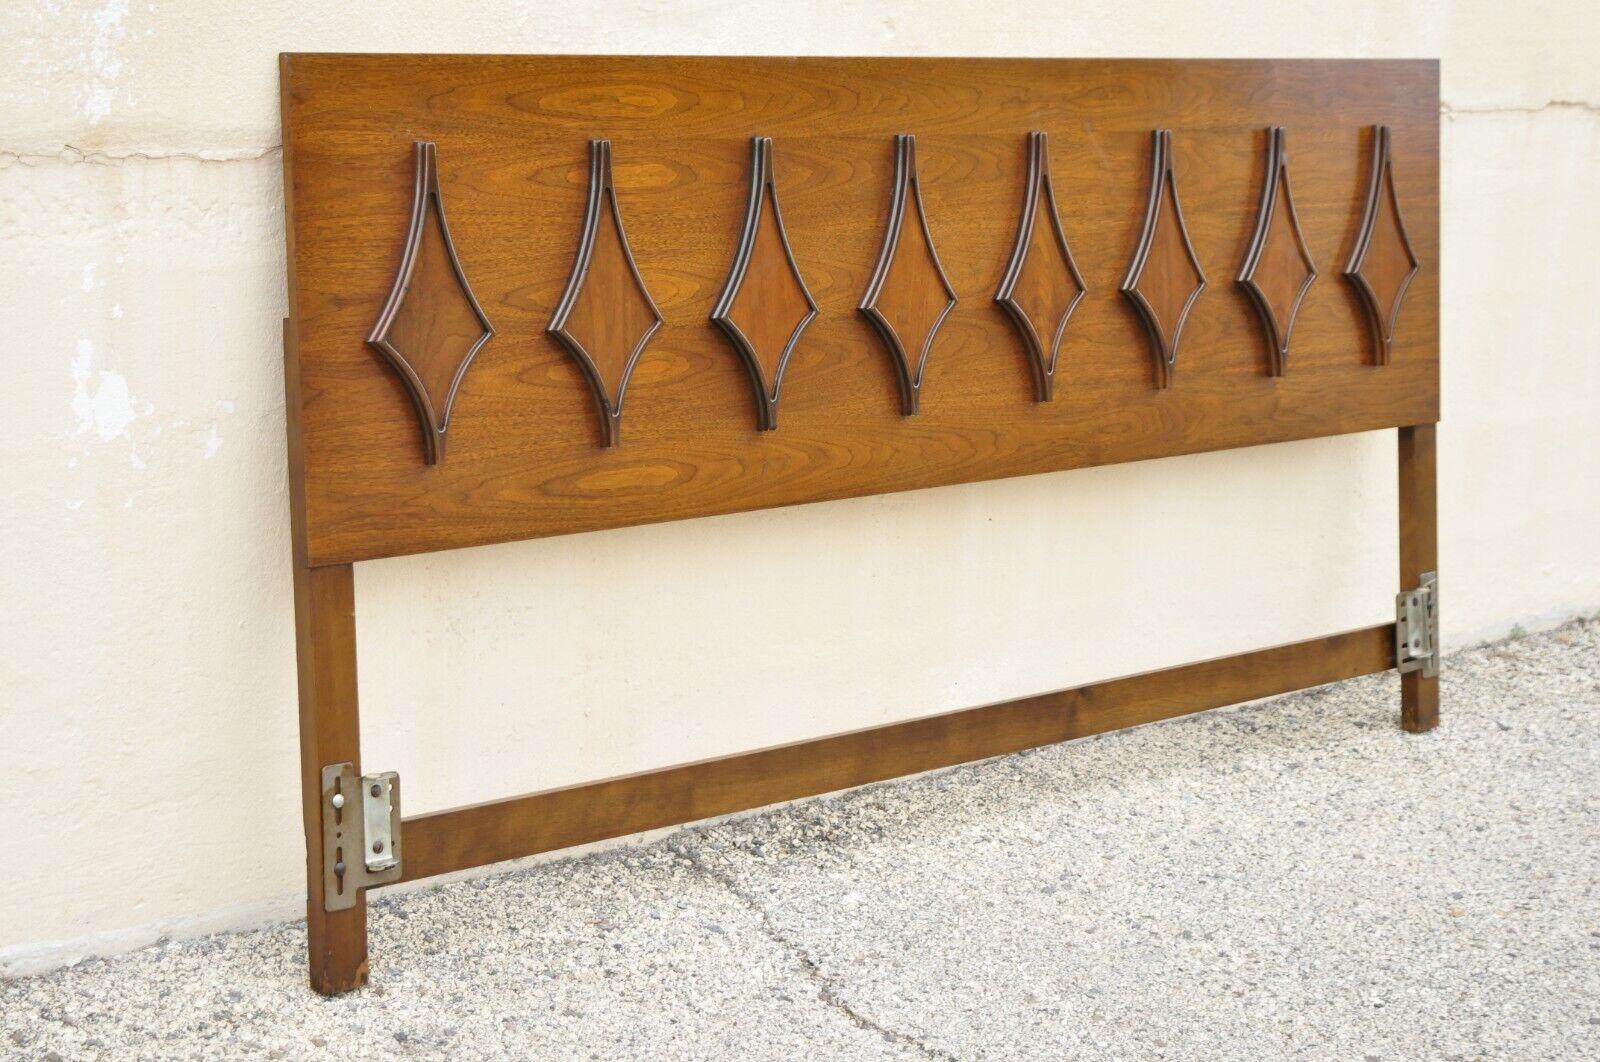 Mid-Century Modern Sculpted Walnut king size headboard by Hanover Made Furniture. Item features beautiful wood grain, original stamp, clean modernist lines, sleek sculptural form. Circa Mid 20th Century. Measurements: 40